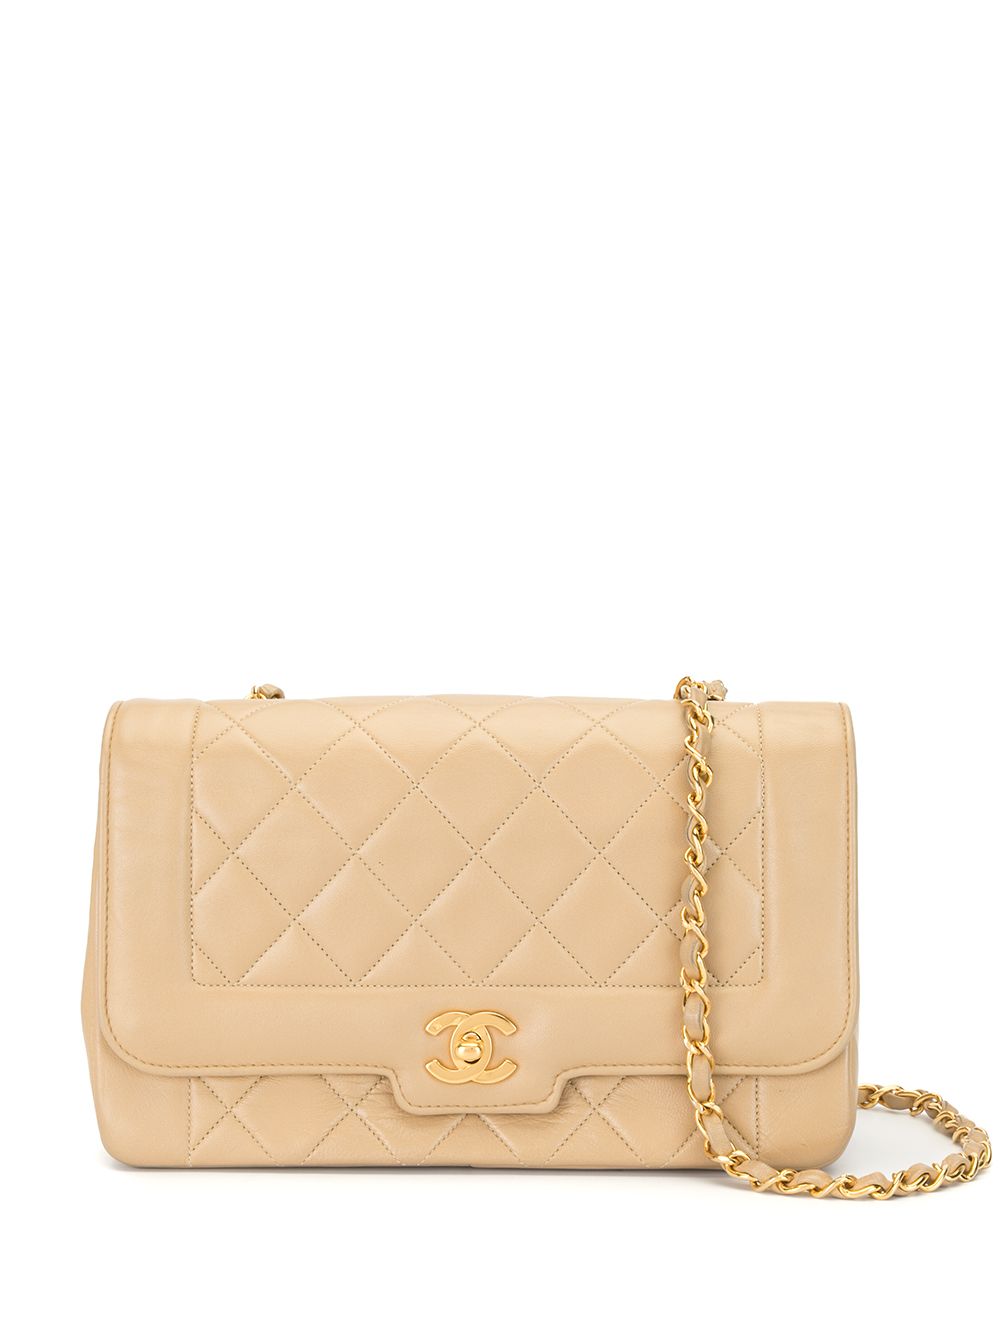 CHANEL Pre-Owned 1990 Diana Quilted Single Chain Shoulder Bag - Farfetch